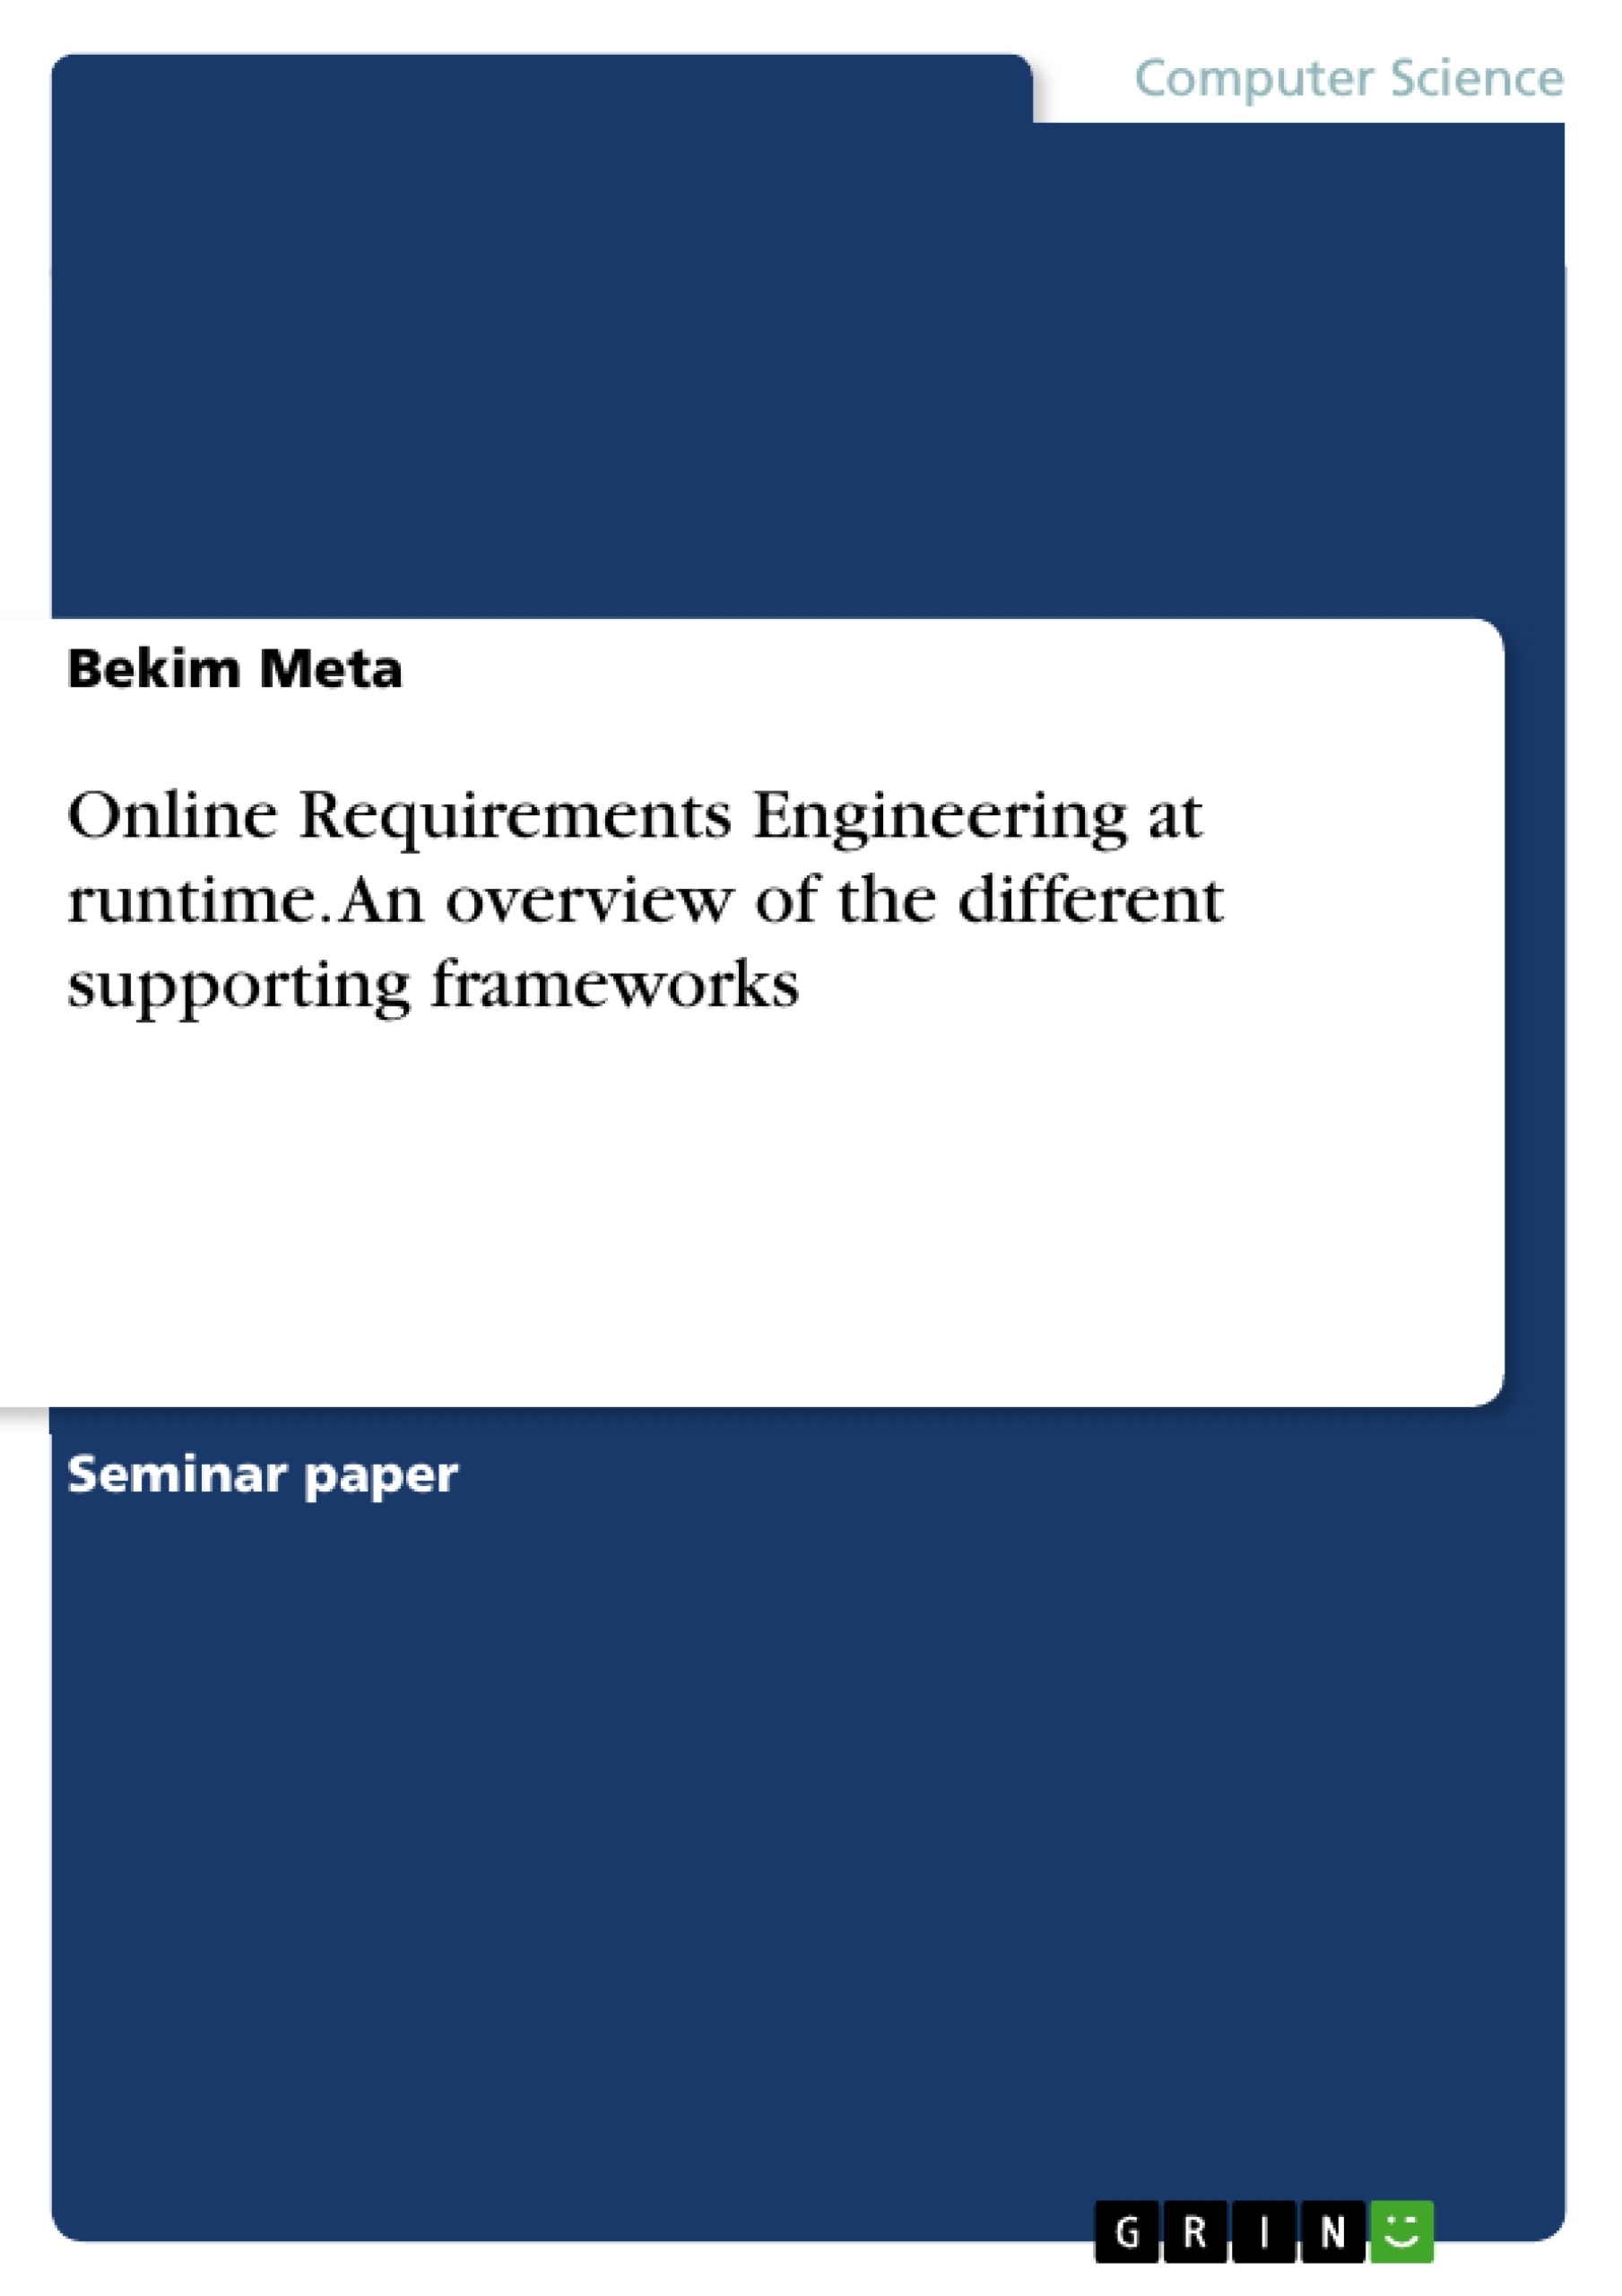 Title: Online Requirements Engineering at runtime. An overview of the different supporting frameworks